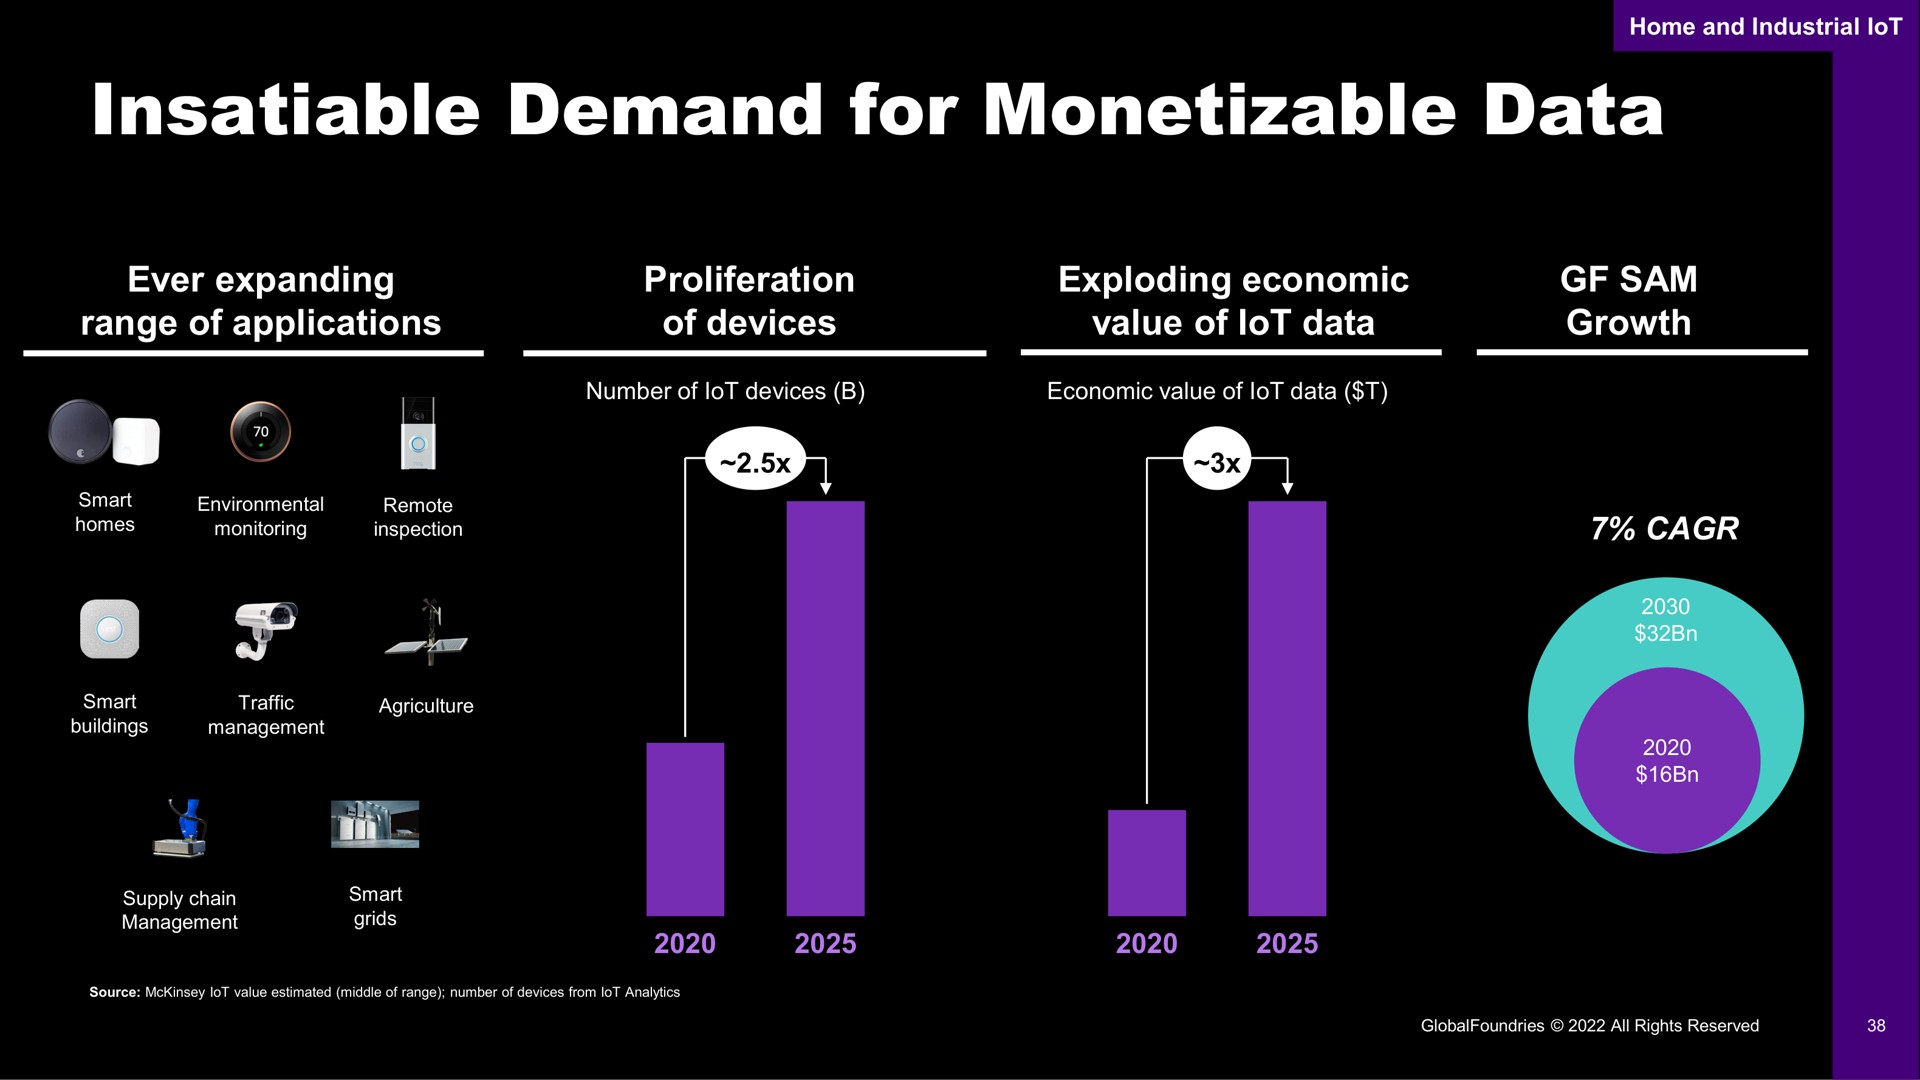 insatiable demand for data | GlobalFoundries